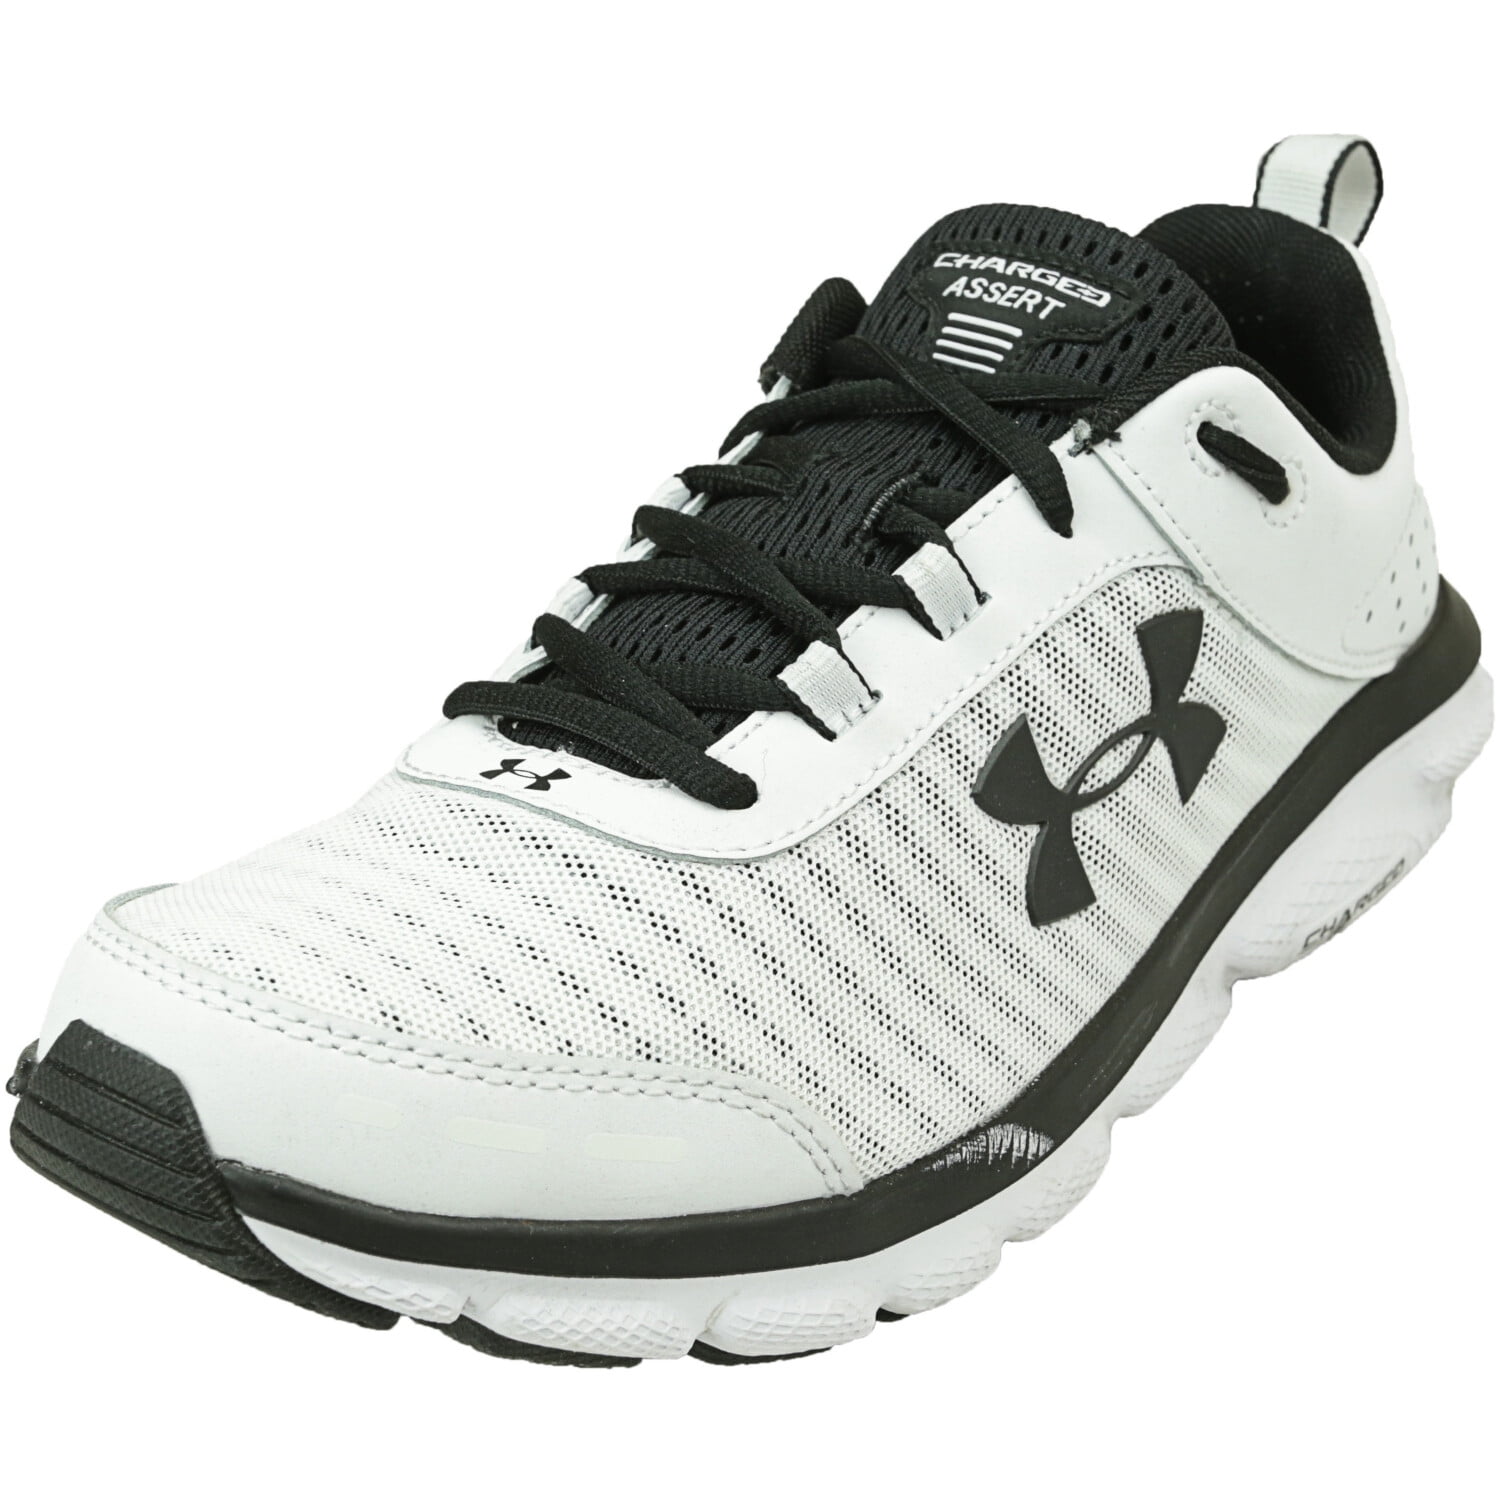 Under Armour Men's Charged Assert 8 White Ankle-High Running - 9M ...